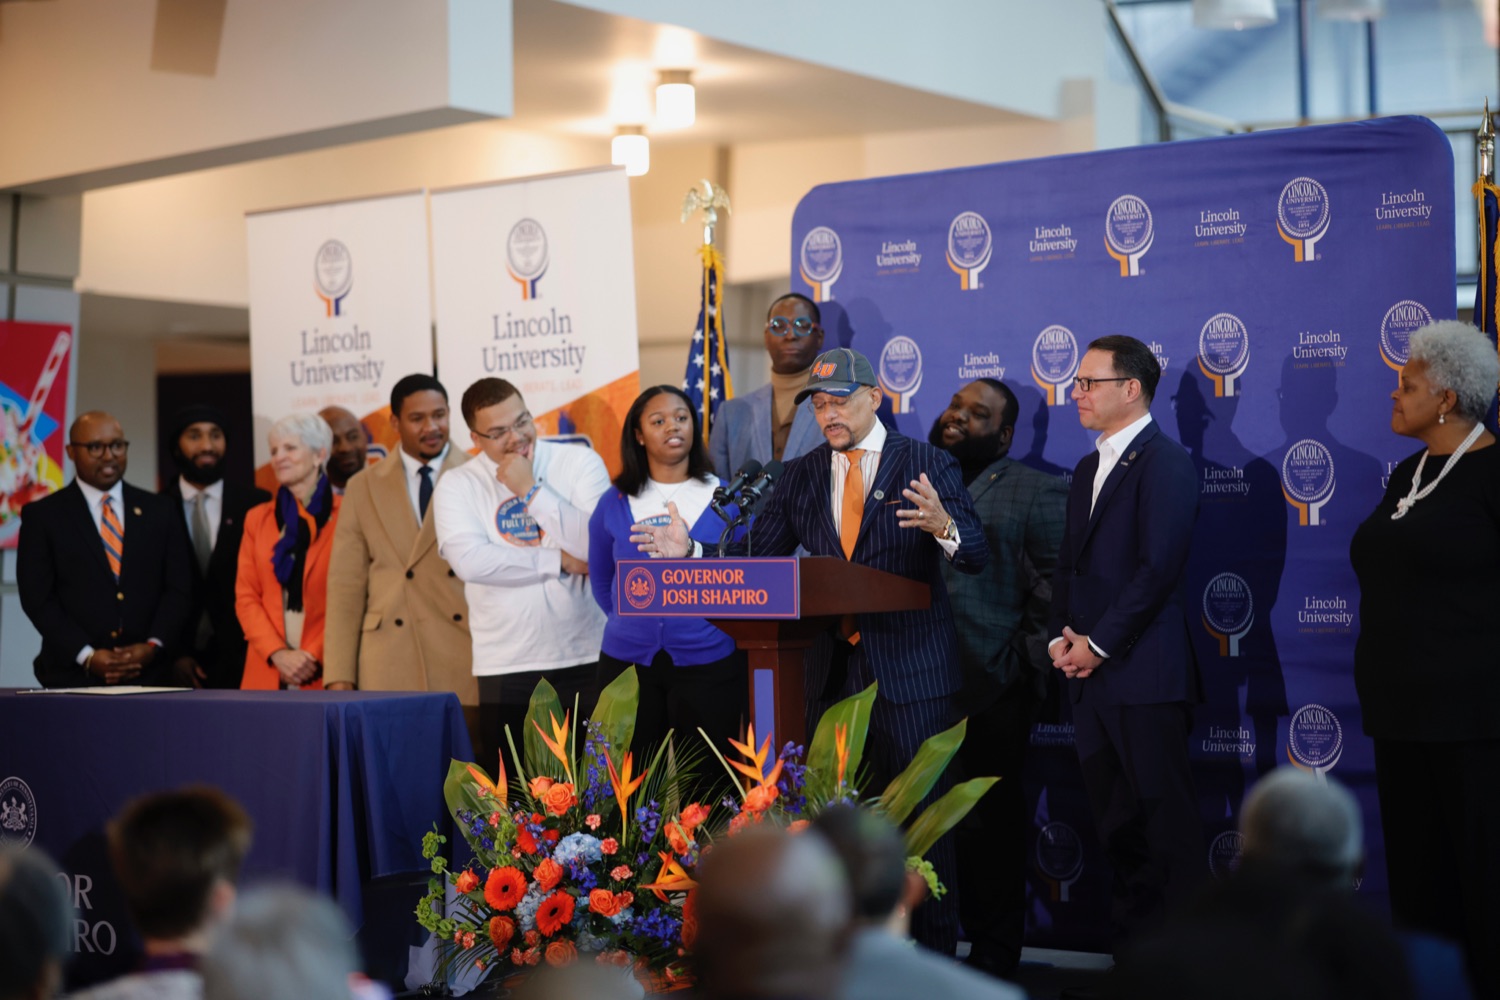 Governor Josh Shapiro joined Secretary of Education Dr. Khalid Mumin, Rep. Jordan Harris, Sen. Vincent Hughes, Sen. Carolyn Comitta, Lincoln University President Brenda Allen and Lincoln University students and staff for a ceremonial bill signing of House Bill (HB) 1461, which provides state funding for Lincoln University and other state-related universities.<br><a href="https://filesource.amperwave.net/commonwealthofpa/photo/24135_gov_HB1461_8.jpeg" target="_blank">⇣ Download Photo</a>